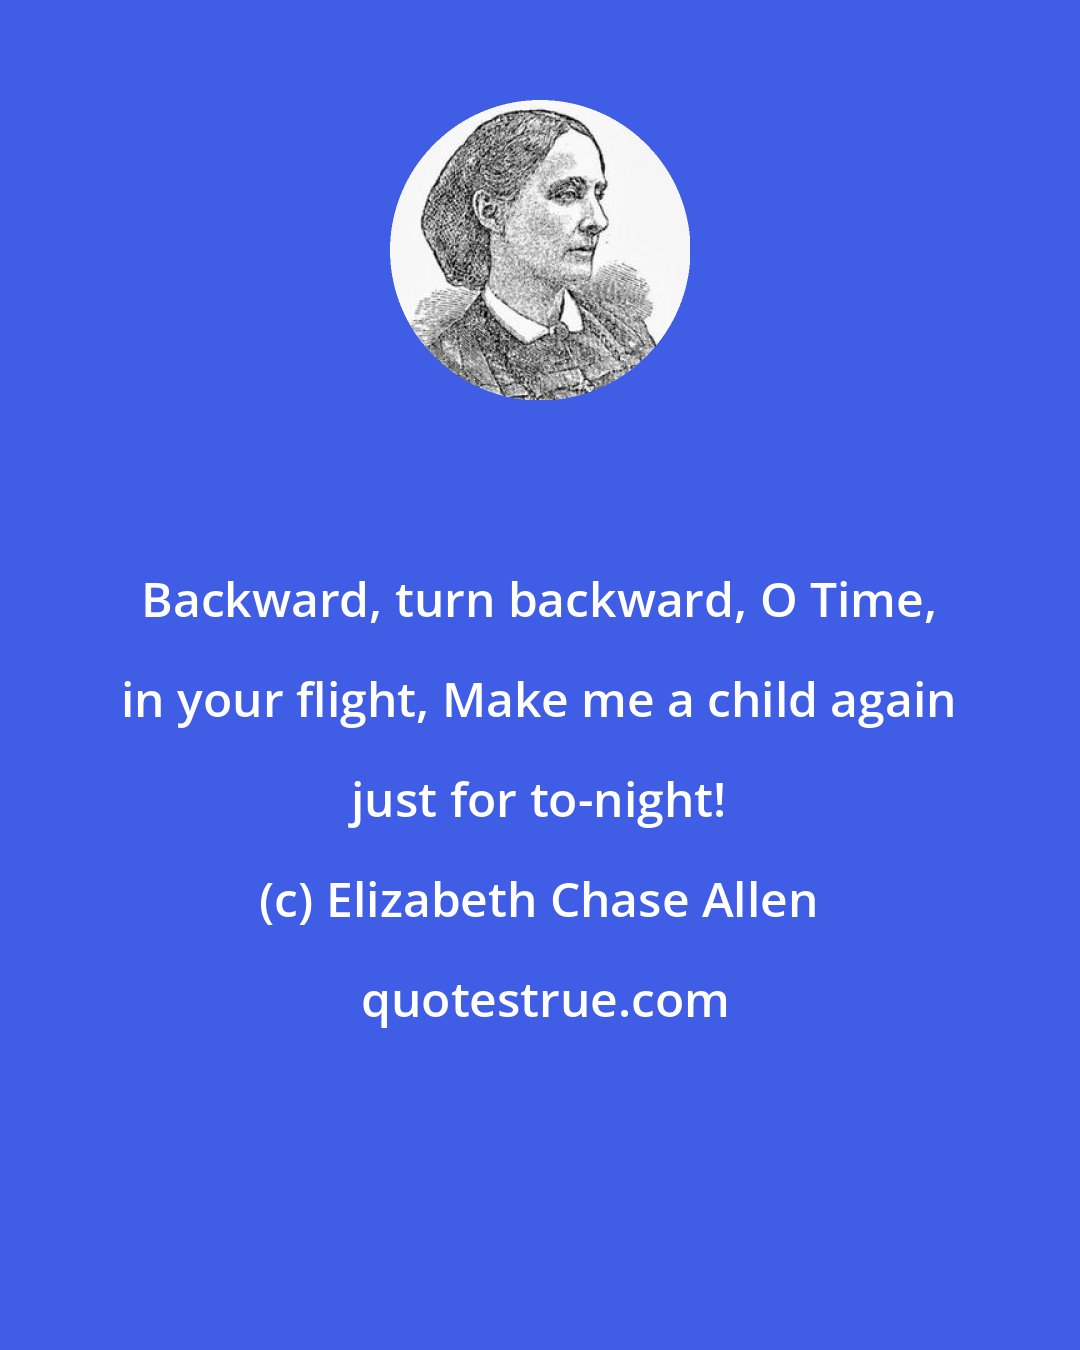 Elizabeth Chase Allen: Backward, turn backward, O Time, in your flight, Make me a child again just for to-night!